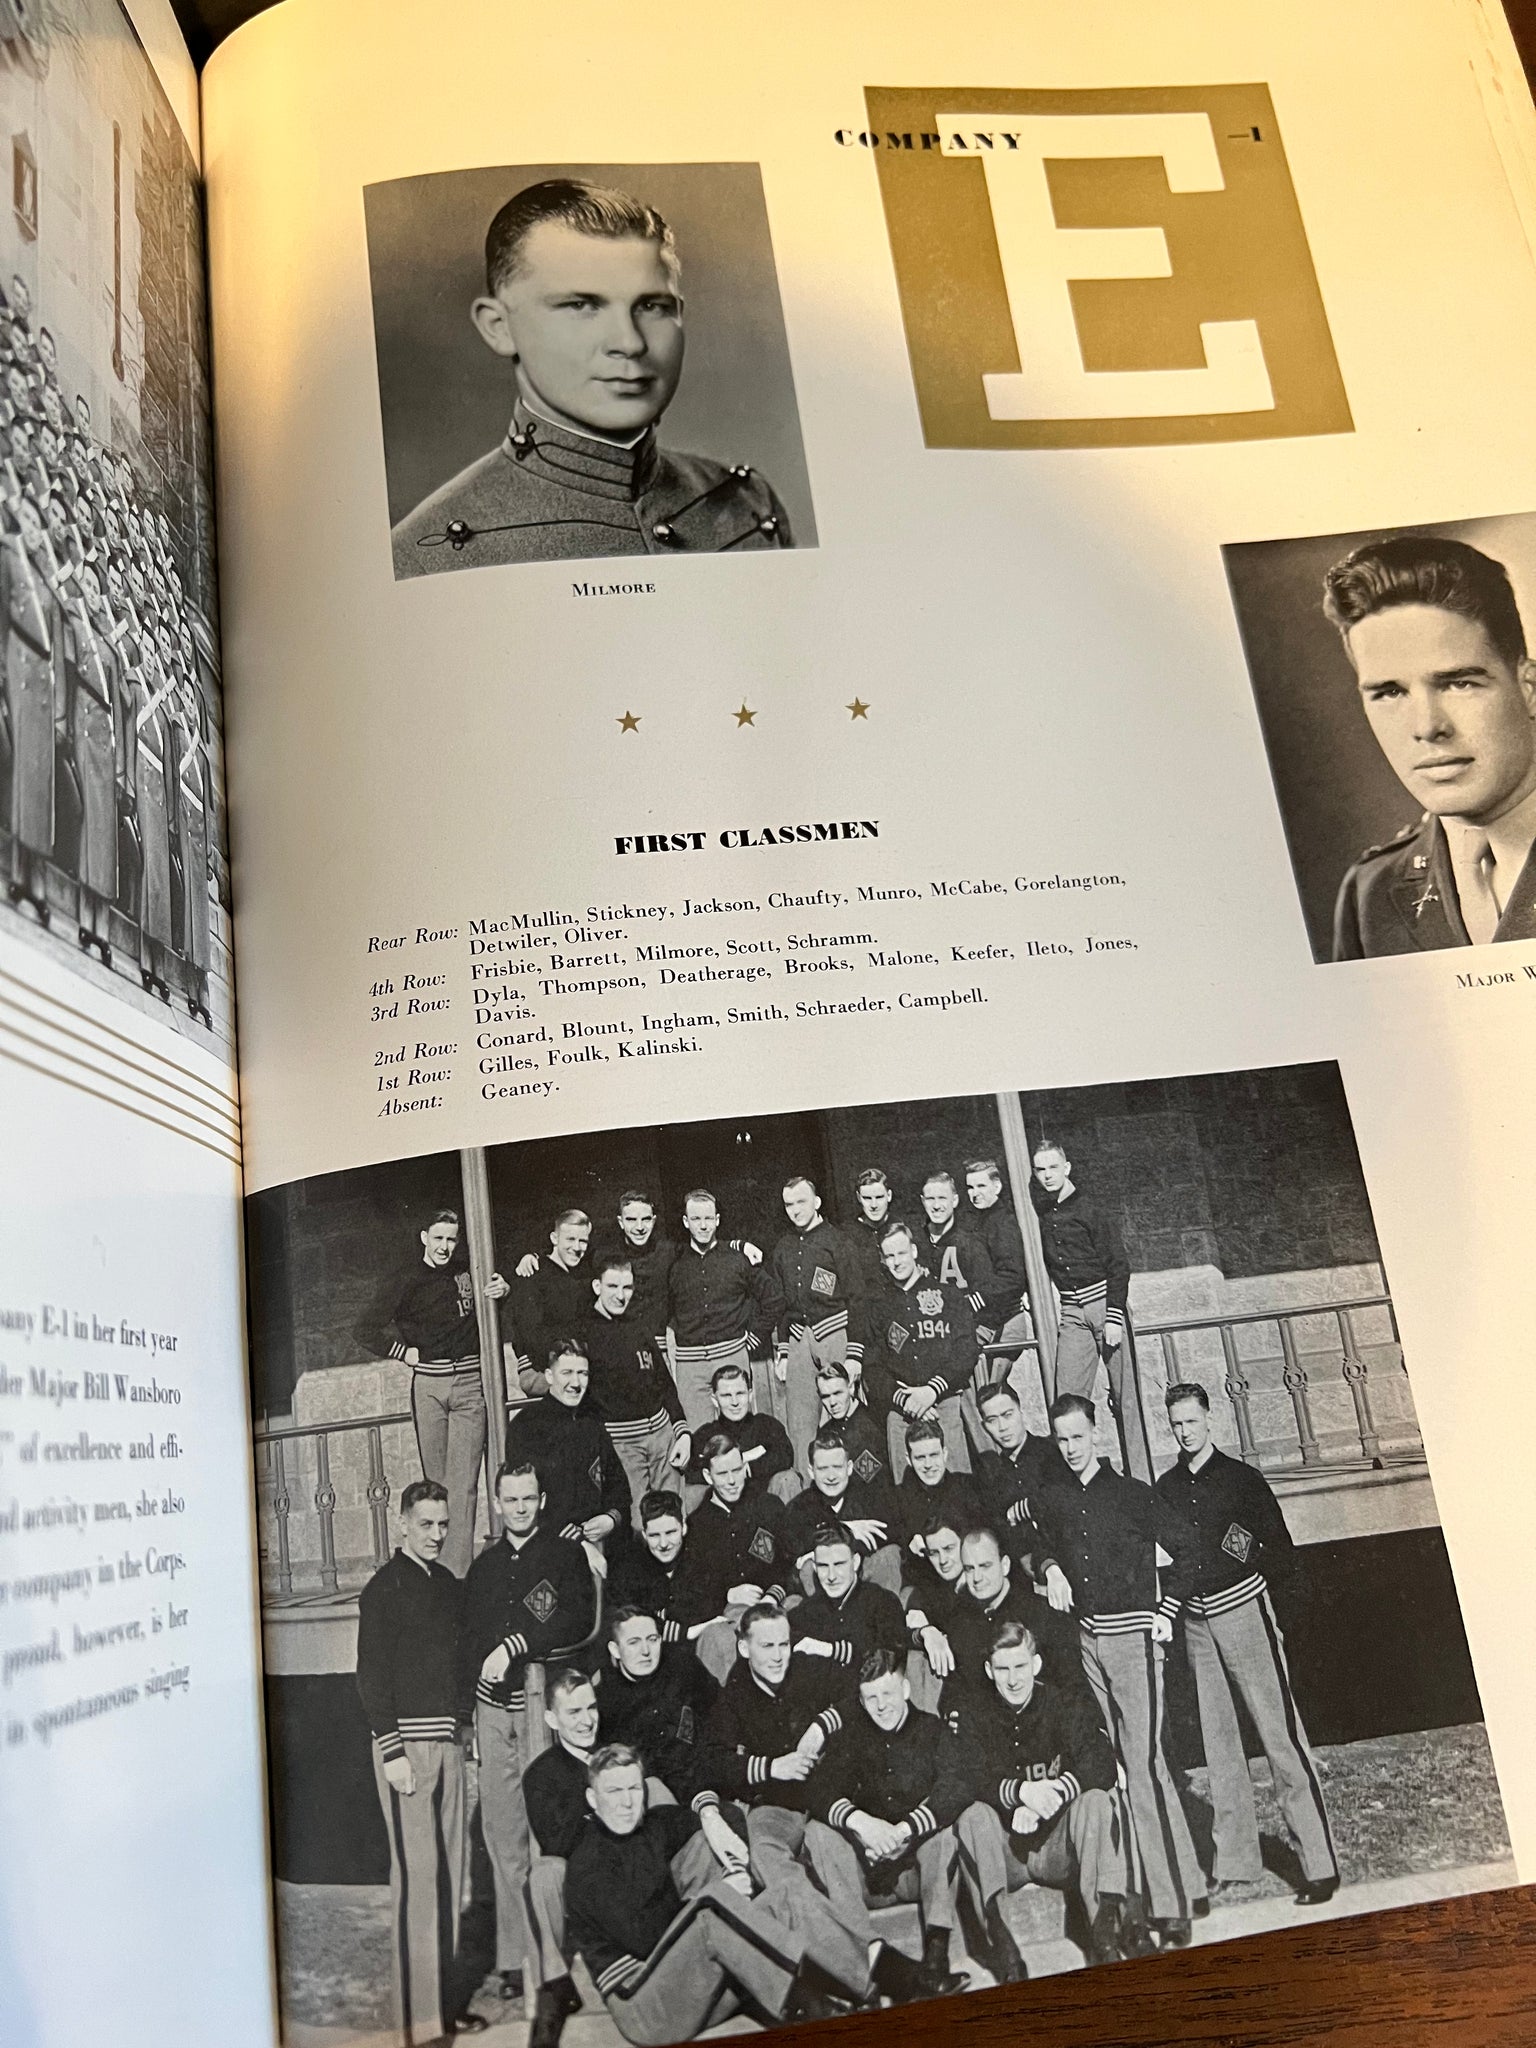 1943 west point cadet sweater & yearbook